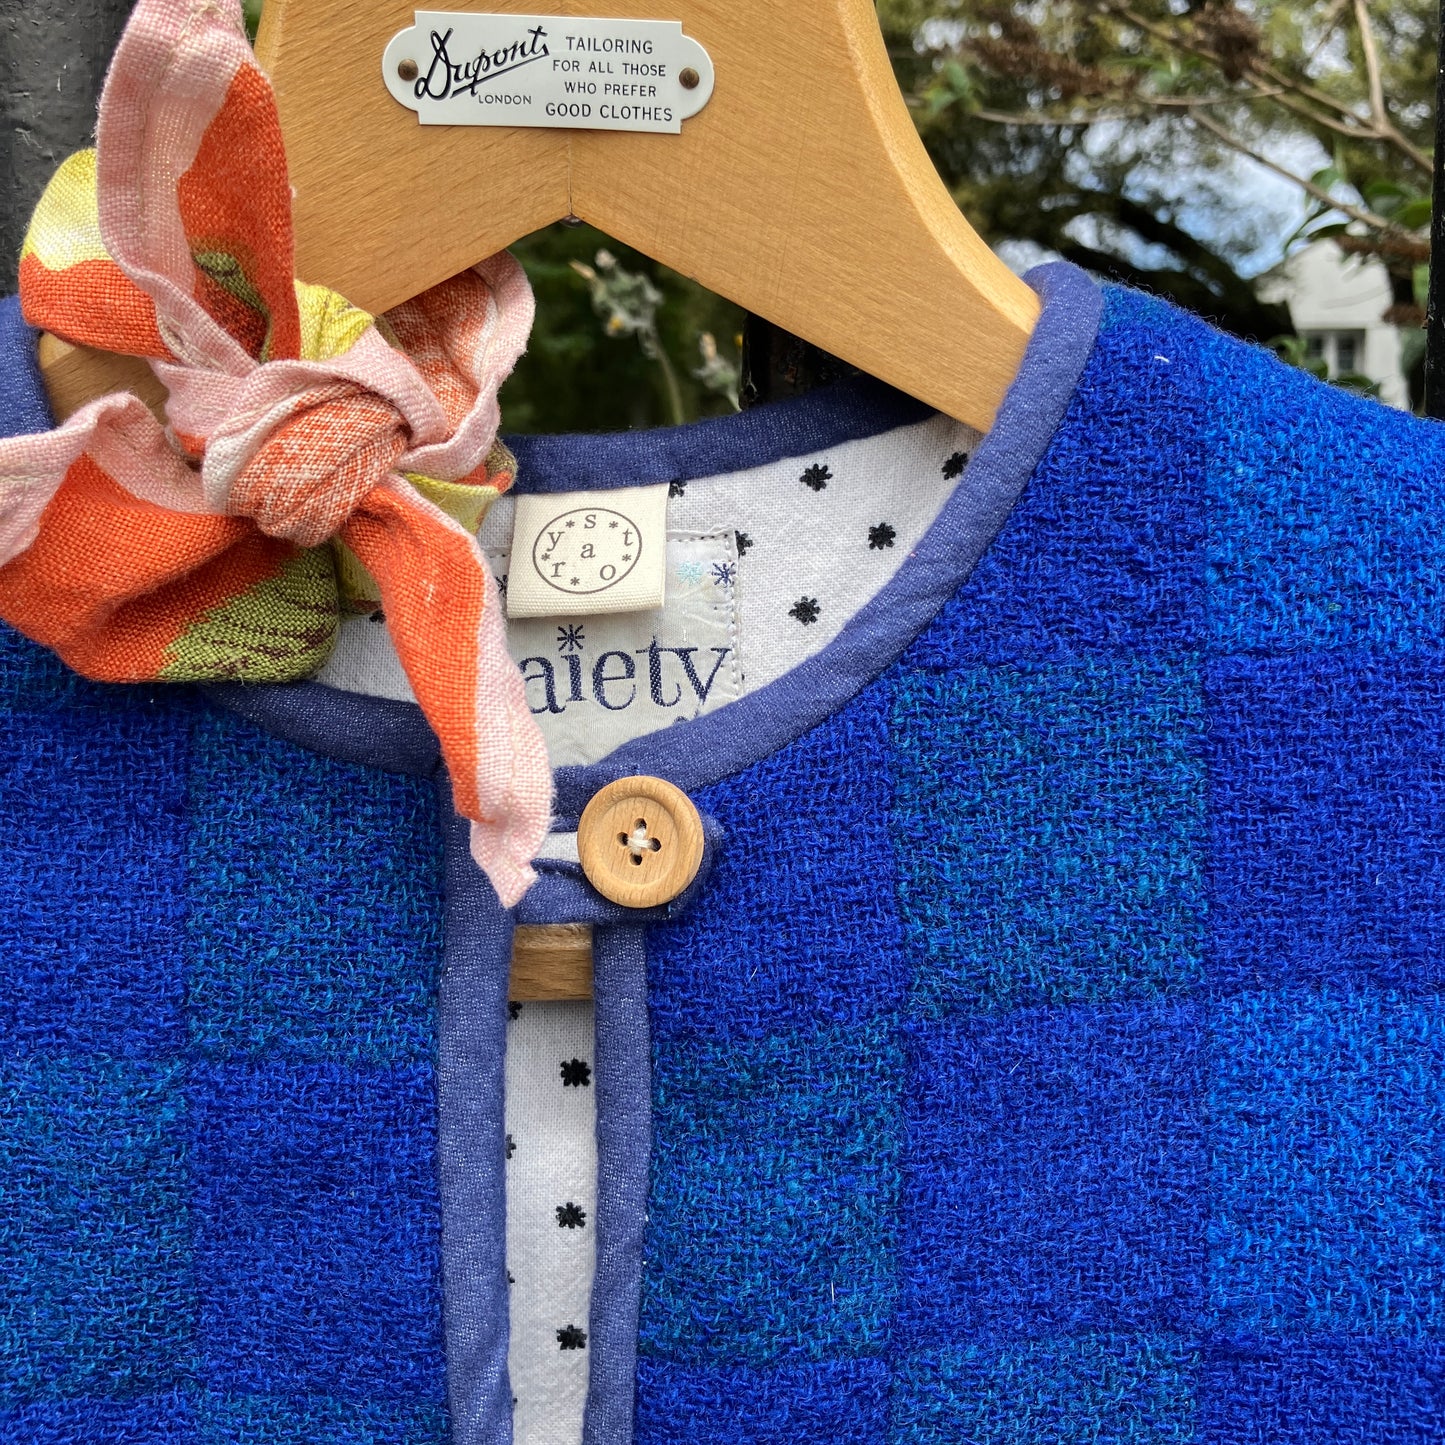 Vest/gilet/waistcoat made from a reclaimed blue checkerboard weave Irish wool Gaiety blanket, photographed in front of a lilac bush